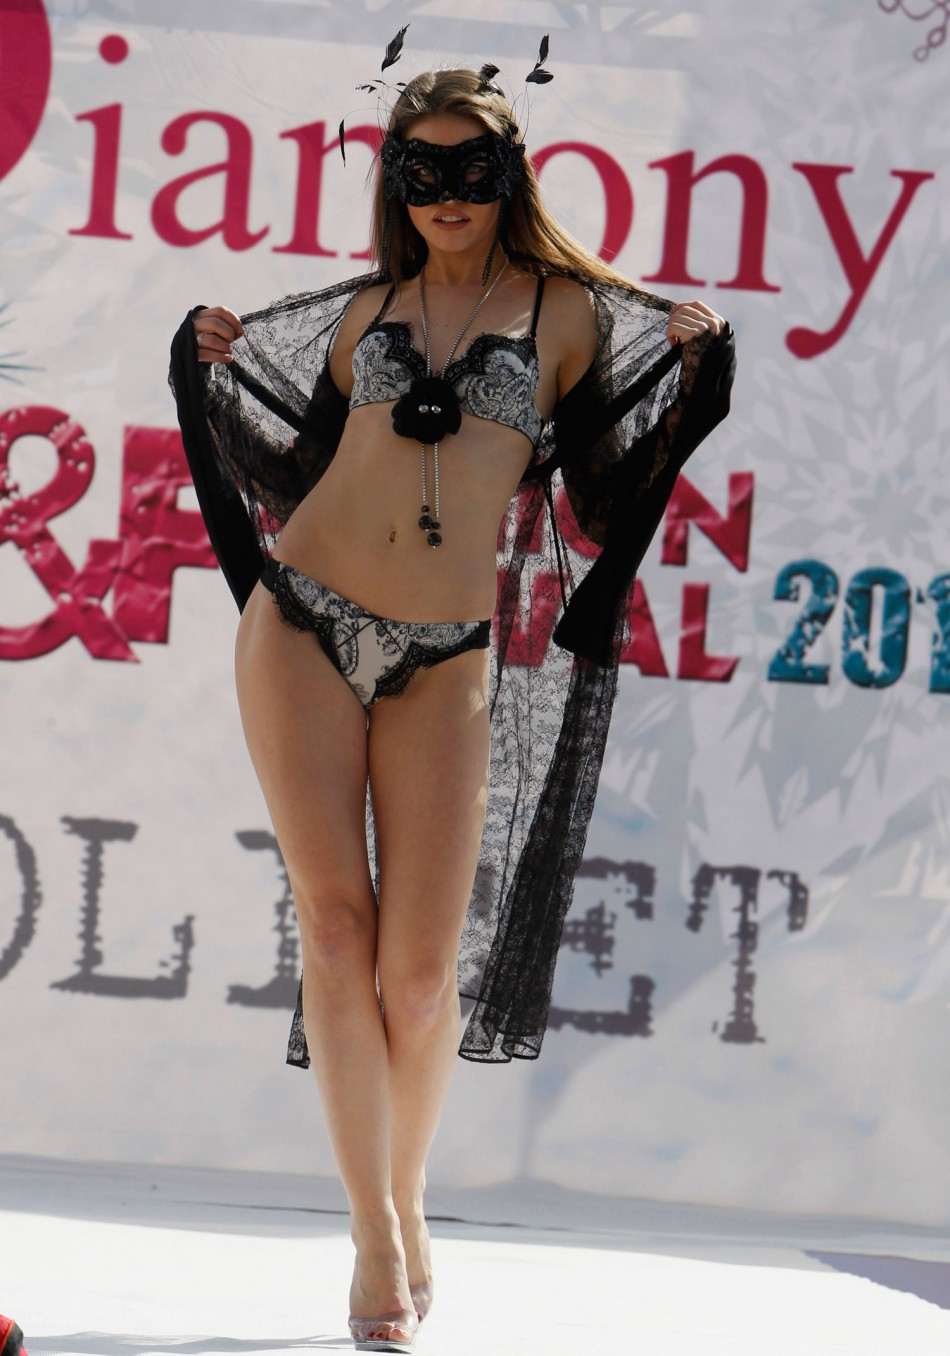 Hottest Lingerie Models in the 2012 Ski and Fashion Festival